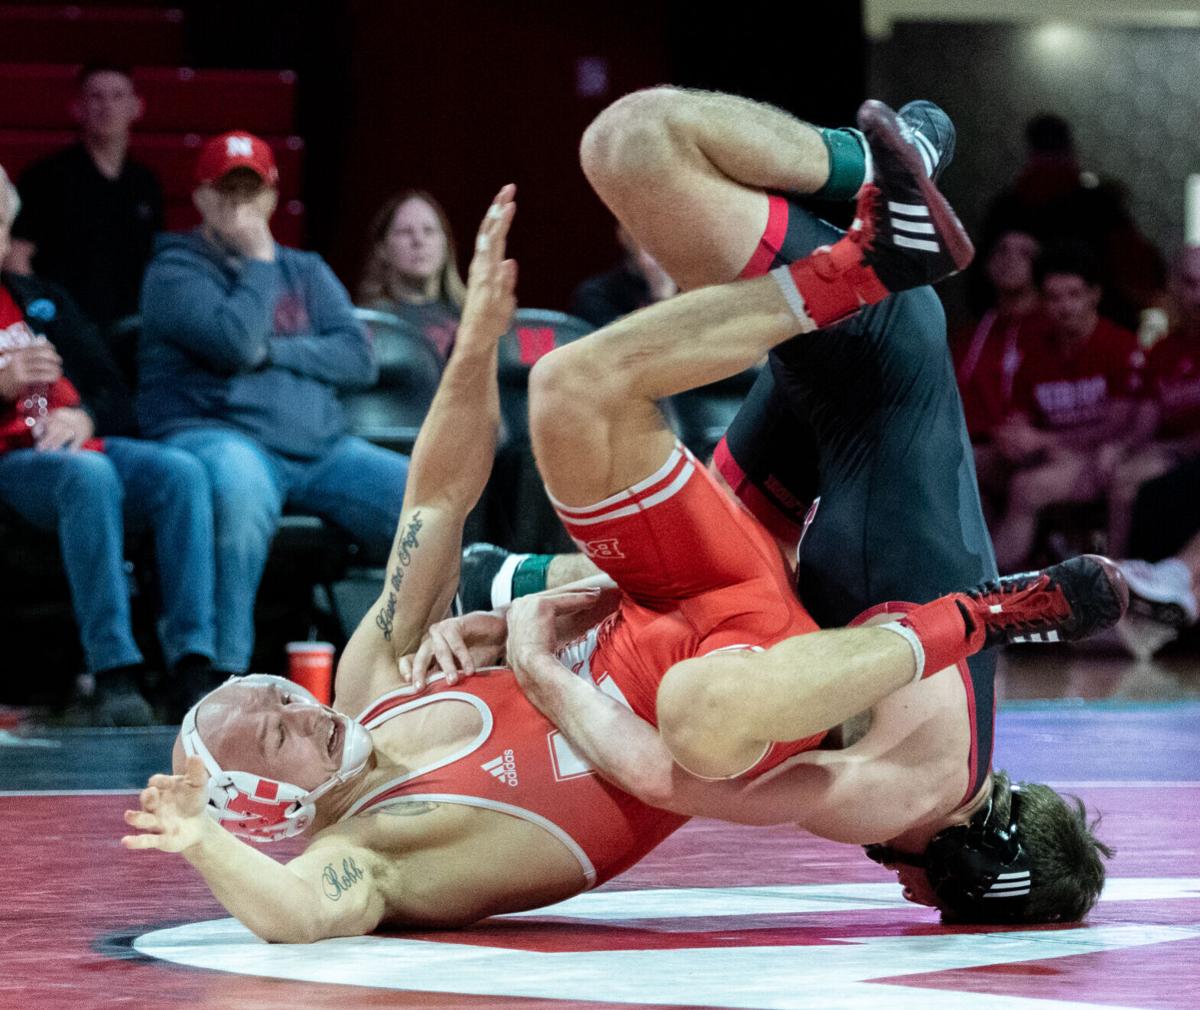 Nebraska looks to repeat as champs at Cliff Keen invite